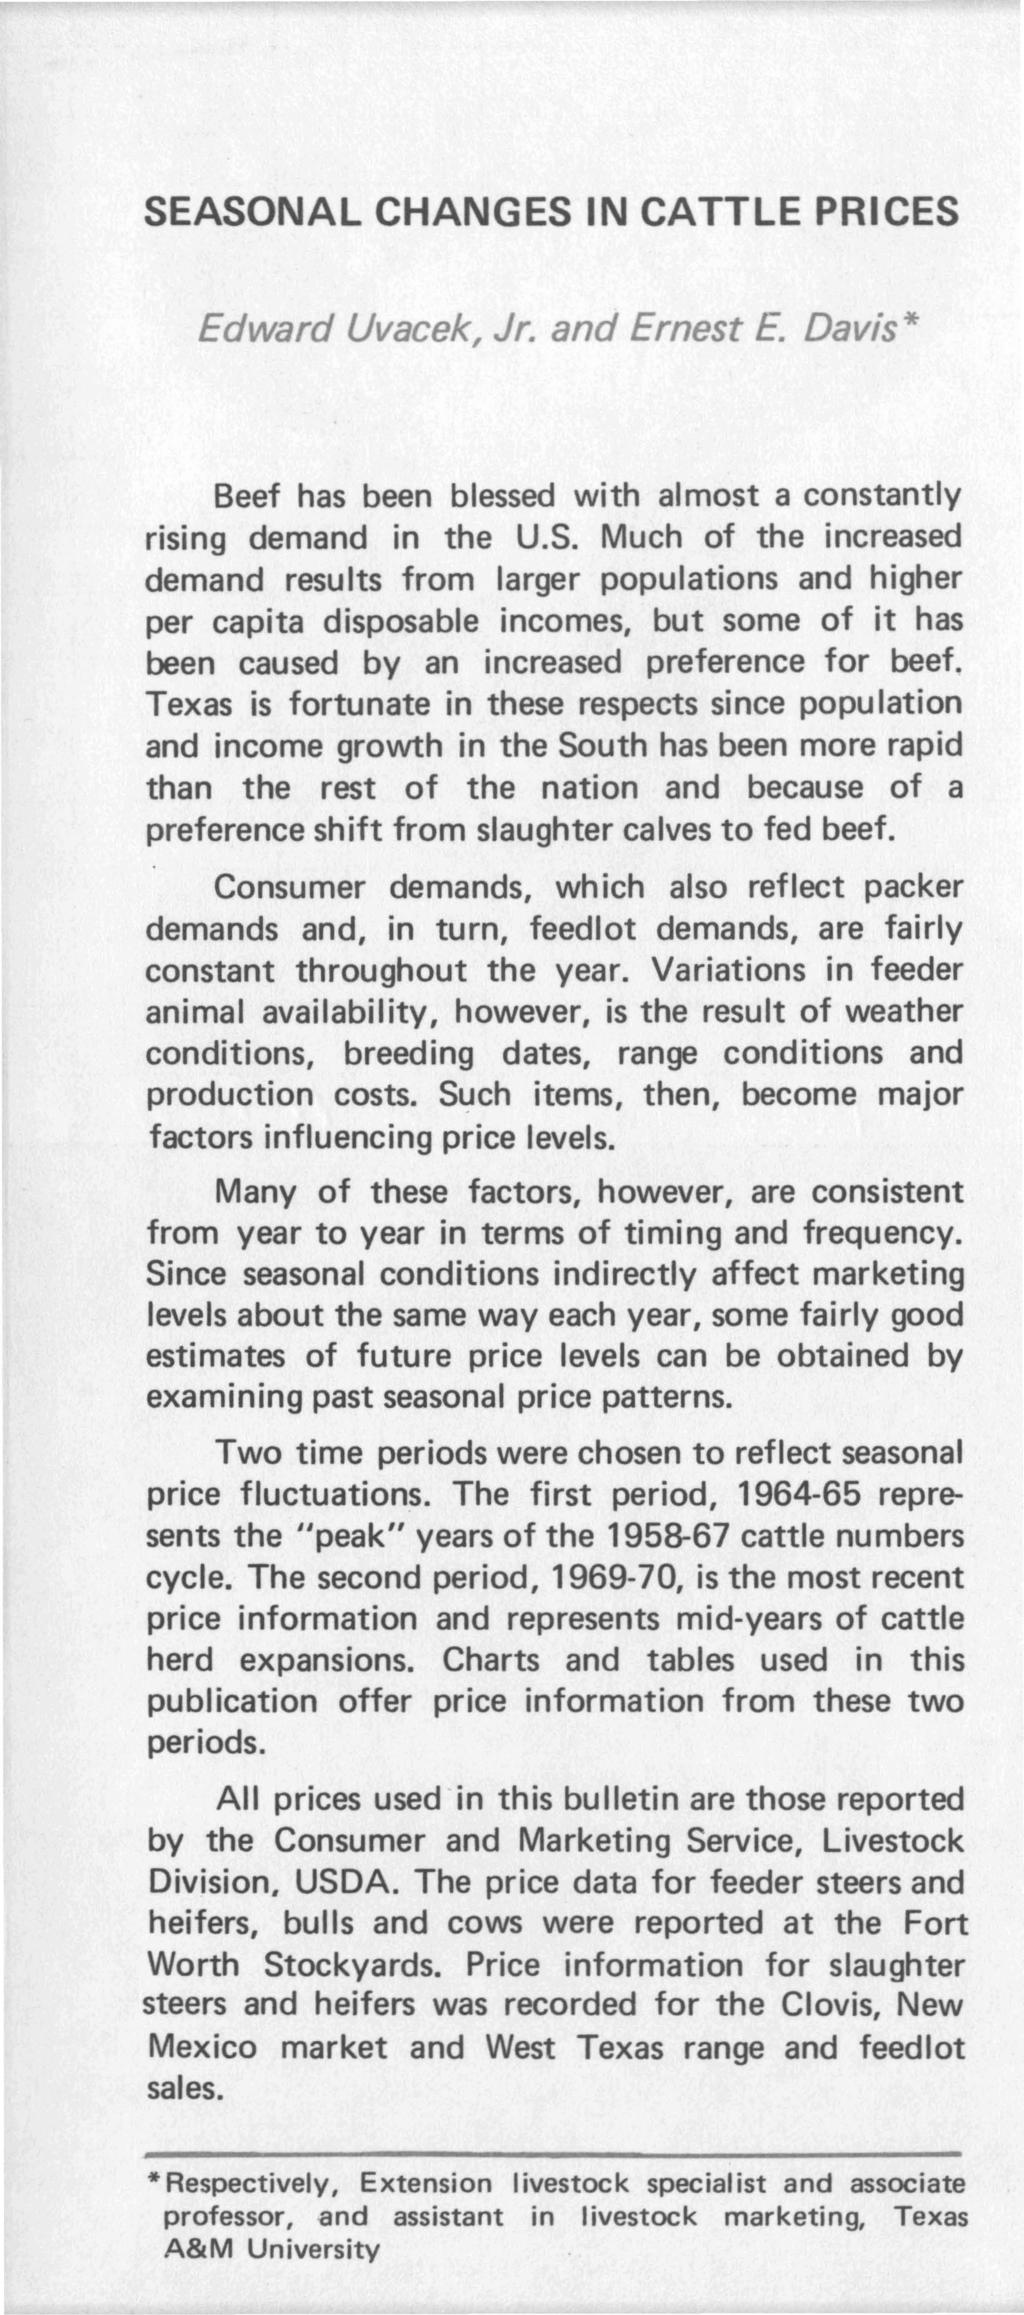 SEASONAL CHANGES IN CATTLE PRICES Edward Uvacek, Jr. and Ernest E. Davis* Beef has been blessed wi th al most a constantly rising demand in the U.S. Much of the increased demand results from larger populations and higher per capita disposable incomes, but some of it has been caused by an increased preference for beef.